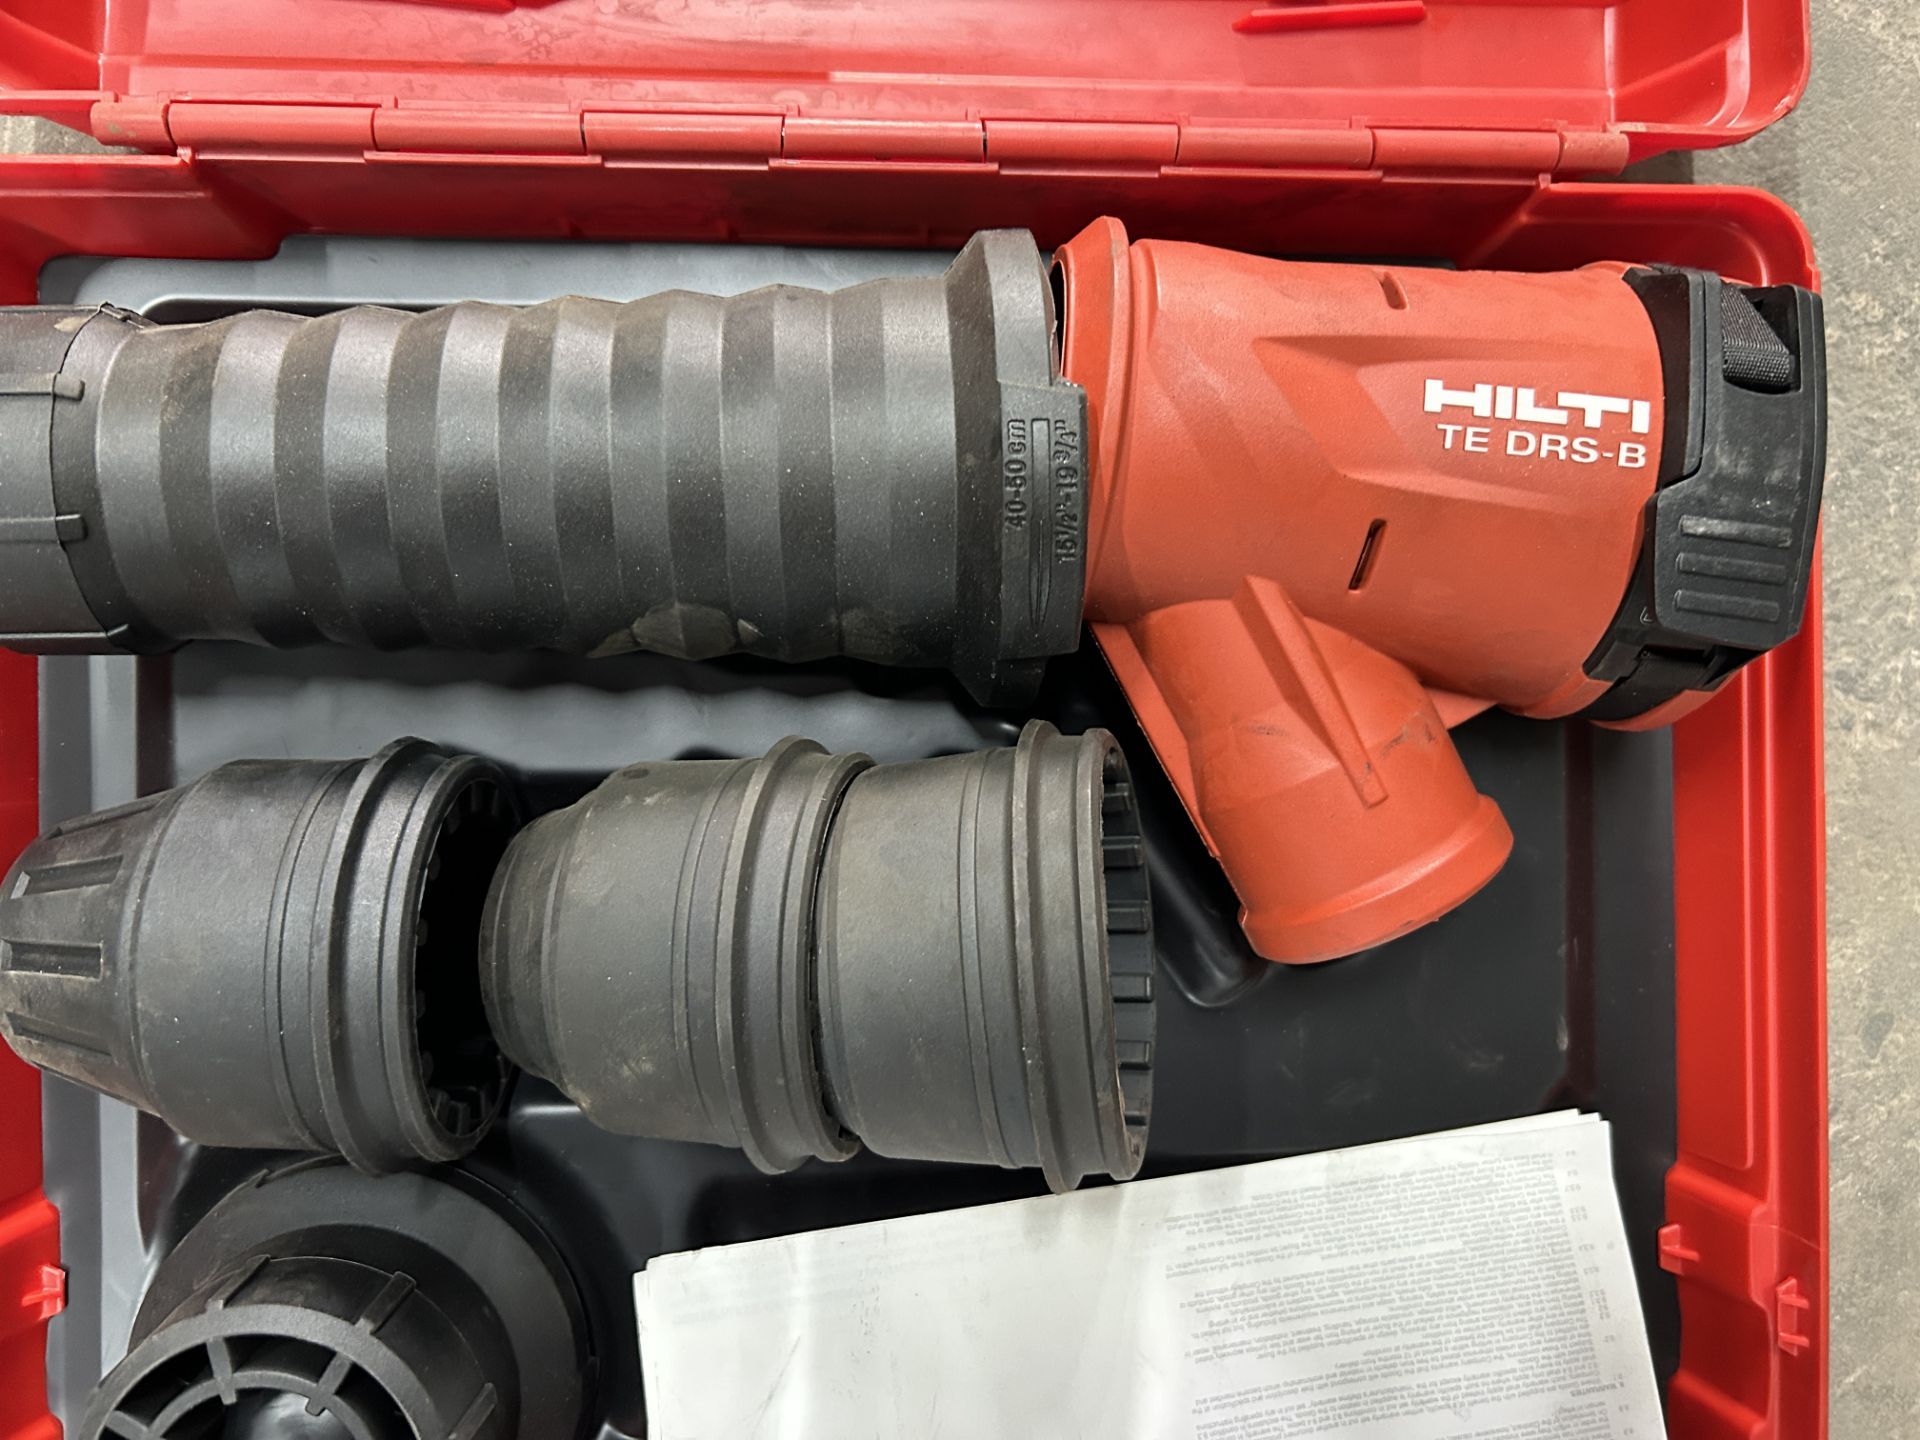 Hilti TE-DRS-B Dust removal system in Case - Image 2 of 2